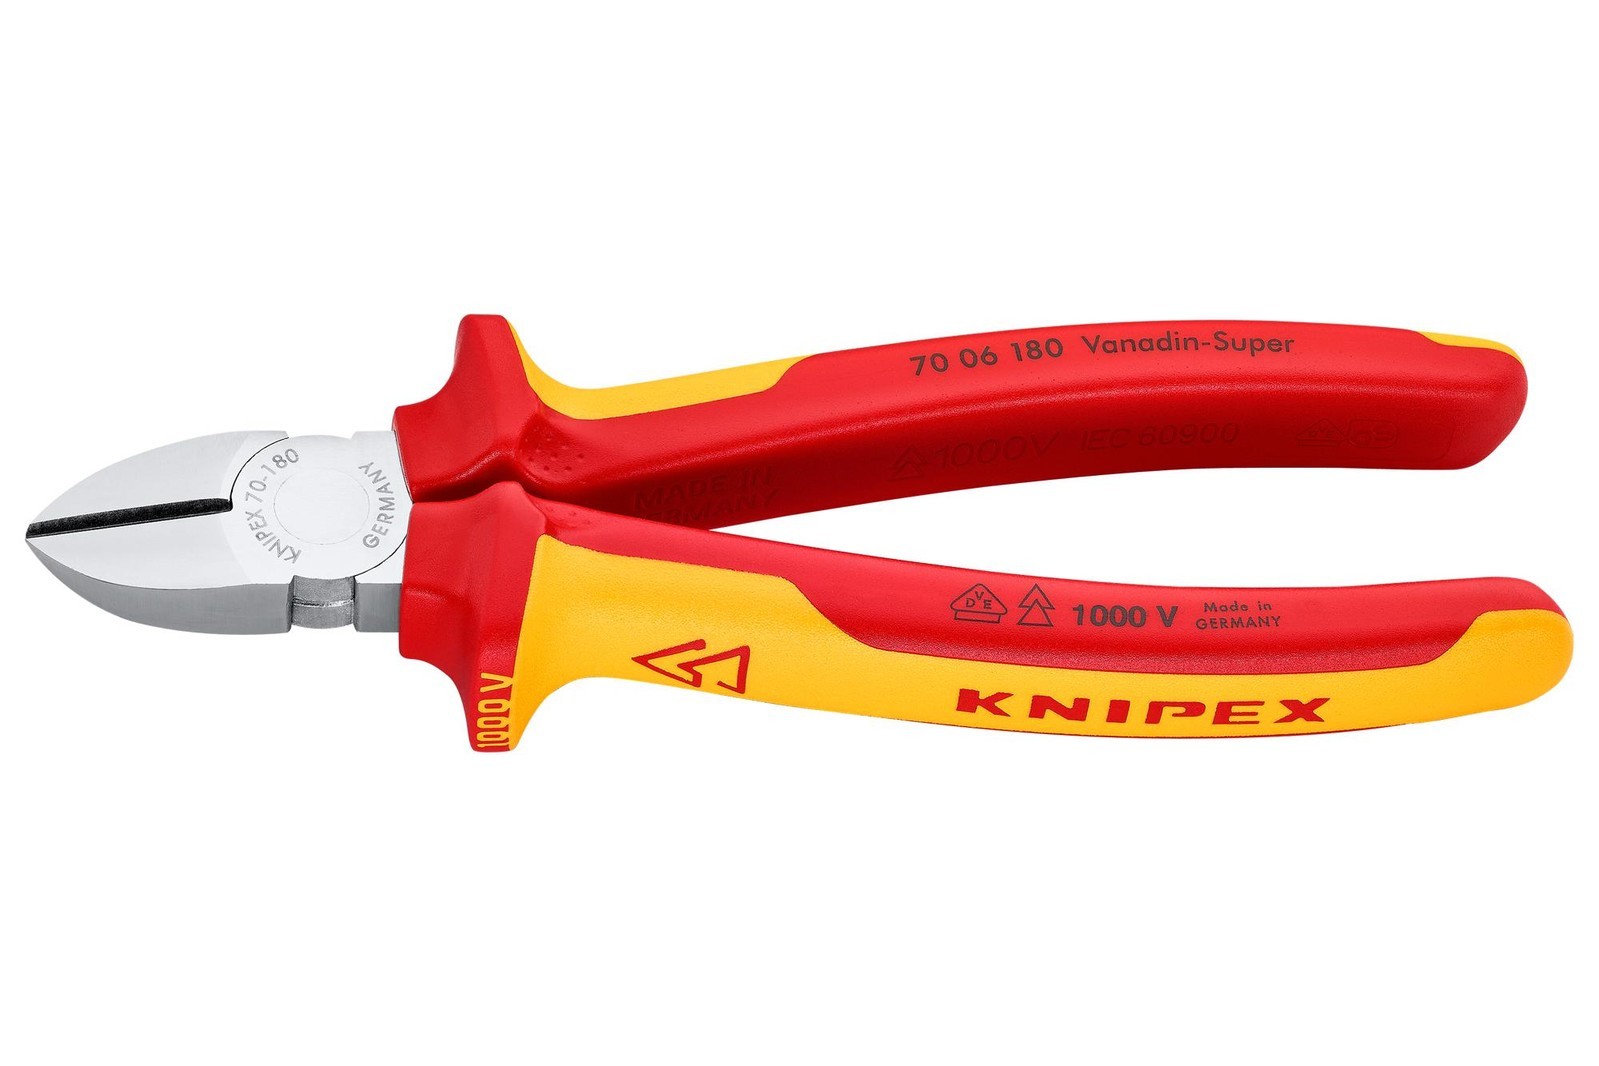 Knipex 70 06 180 Cutter, Side, Vde